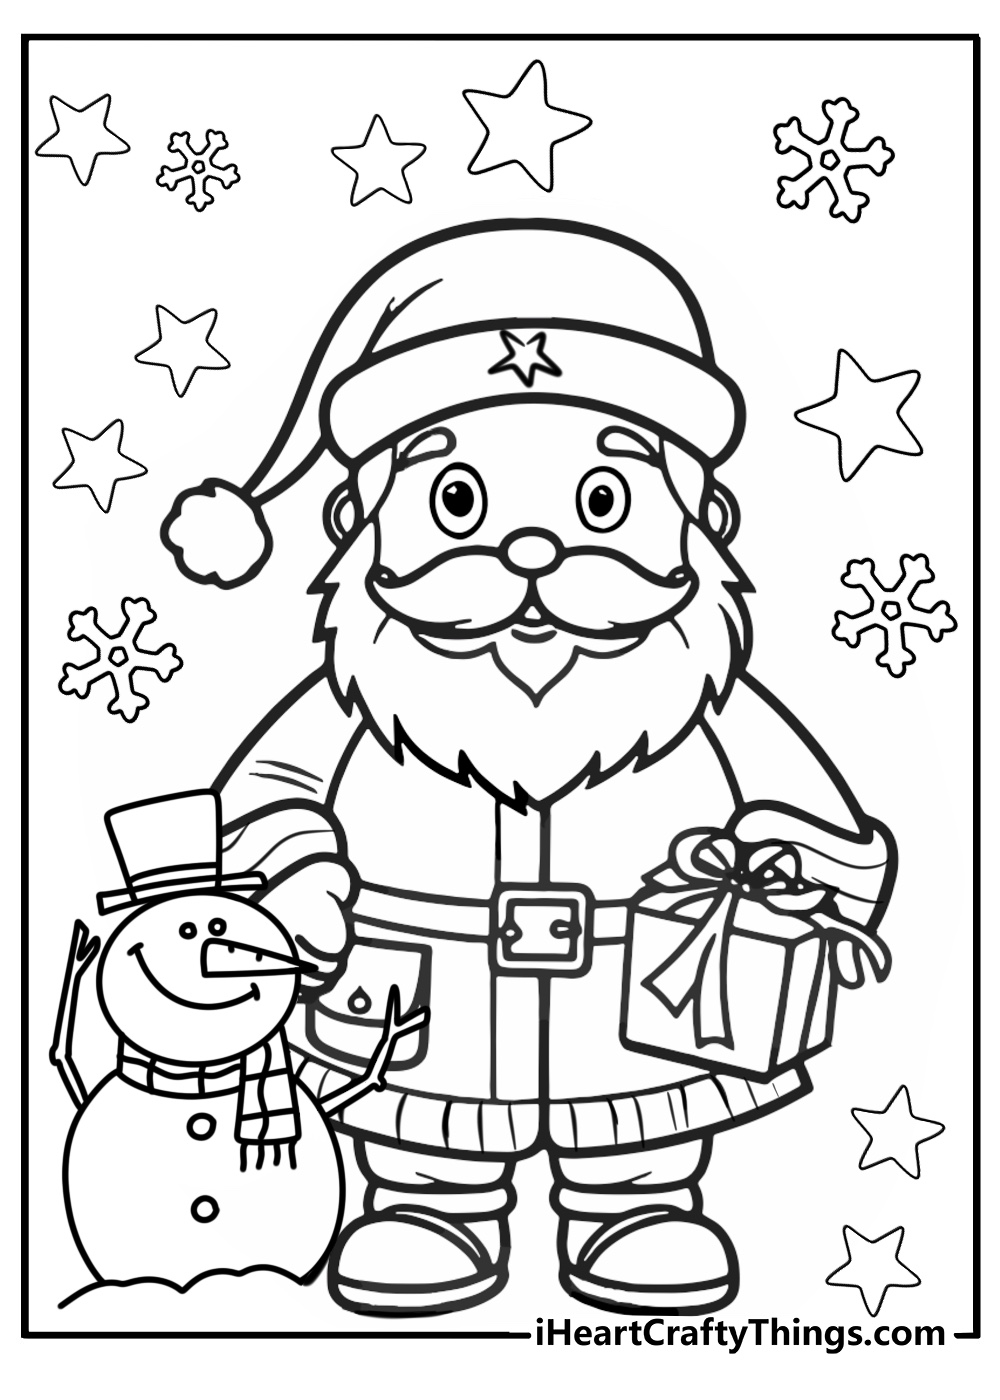 Santa coloring pages for christmas